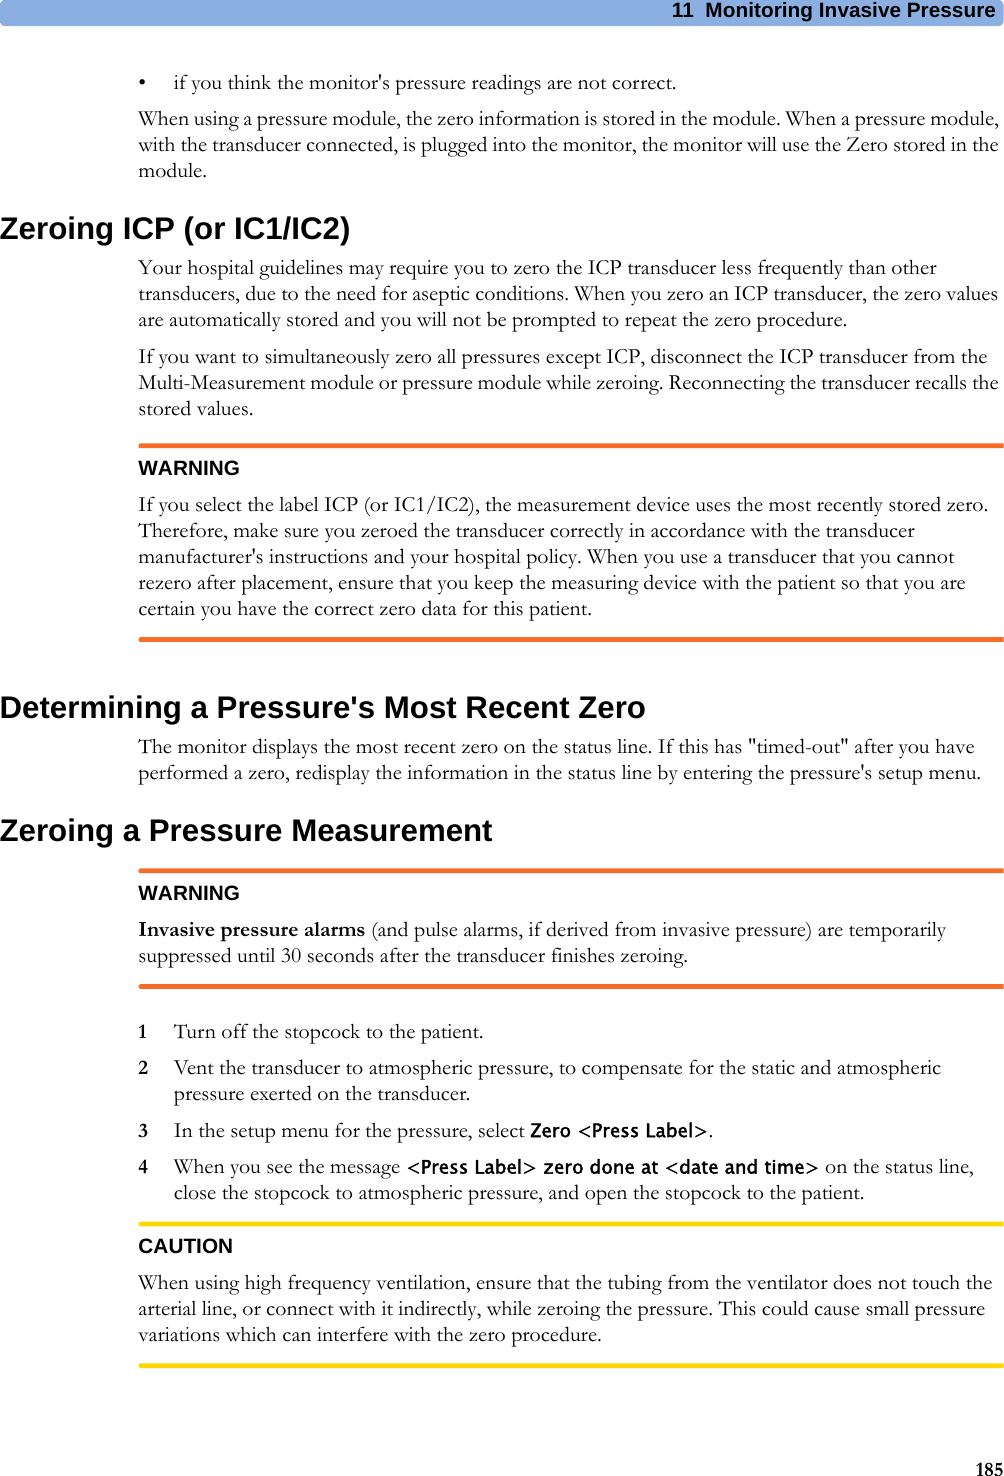 11 Monitoring Invasive Pressure185• if you think the monitor&apos;s pressure readings are not correct.When using a pressure module, the zero information is stored in the module. When a pressure module, with the transducer connected, is plugged into the monitor, the monitor will use the Zero stored in the module.Zeroing ICP (or IC1/IC2)Your hospital guidelines may require you to zero the ICP transducer less frequently than other transducers, due to the need for aseptic conditions. When you zero an ICP transducer, the zero values are automatically stored and you will not be prompted to repeat the zero procedure.If you want to simultaneously zero all pressures except ICP, disconnect the ICP transducer from the Multi-Measurement module or pressure module while zeroing. Reconnecting the transducer recalls the stored values.WARNINGIf you select the label ICP (or IC1/IC2), the measurement device uses the most recently stored zero. Therefore, make sure you zeroed the transducer correctly in accordance with the transducer manufacturer&apos;s instructions and your hospital policy. When you use a transducer that you cannot rezero after placement, ensure that you keep the measuring device with the patient so that you are certain you have the correct zero data for this patient.Determining a Pressure&apos;s Most Recent ZeroThe monitor displays the most recent zero on the status line. If this has &quot;timed-out&quot; after you have performed a zero, redisplay the information in the status line by entering the pressure&apos;s setup menu.Zeroing a Pressure MeasurementWARNINGInvasive pressure alarms (and pulse alarms, if derived from invasive pressure) are temporarily suppressed until 30 seconds after the transducer finishes zeroing.1Turn off the stopcock to the patient.2Vent the transducer to atmospheric pressure, to compensate for the static and atmospheric pressure exerted on the transducer.3In the setup menu for the pressure, select Zero &lt;Press Label&gt;.4When you see the message &lt;Press Label&gt; zero done at &lt;date and time&gt; on the status line, close the stopcock to atmospheric pressure, and open the stopcock to the patient.CAUTIONWhen using high frequency ventilation, ensure that the tubing from the ventilator does not touch the arterial line, or connect with it indirectly, while zeroing the pressure. This could cause small pressure variations which can interfere with the zero procedure.